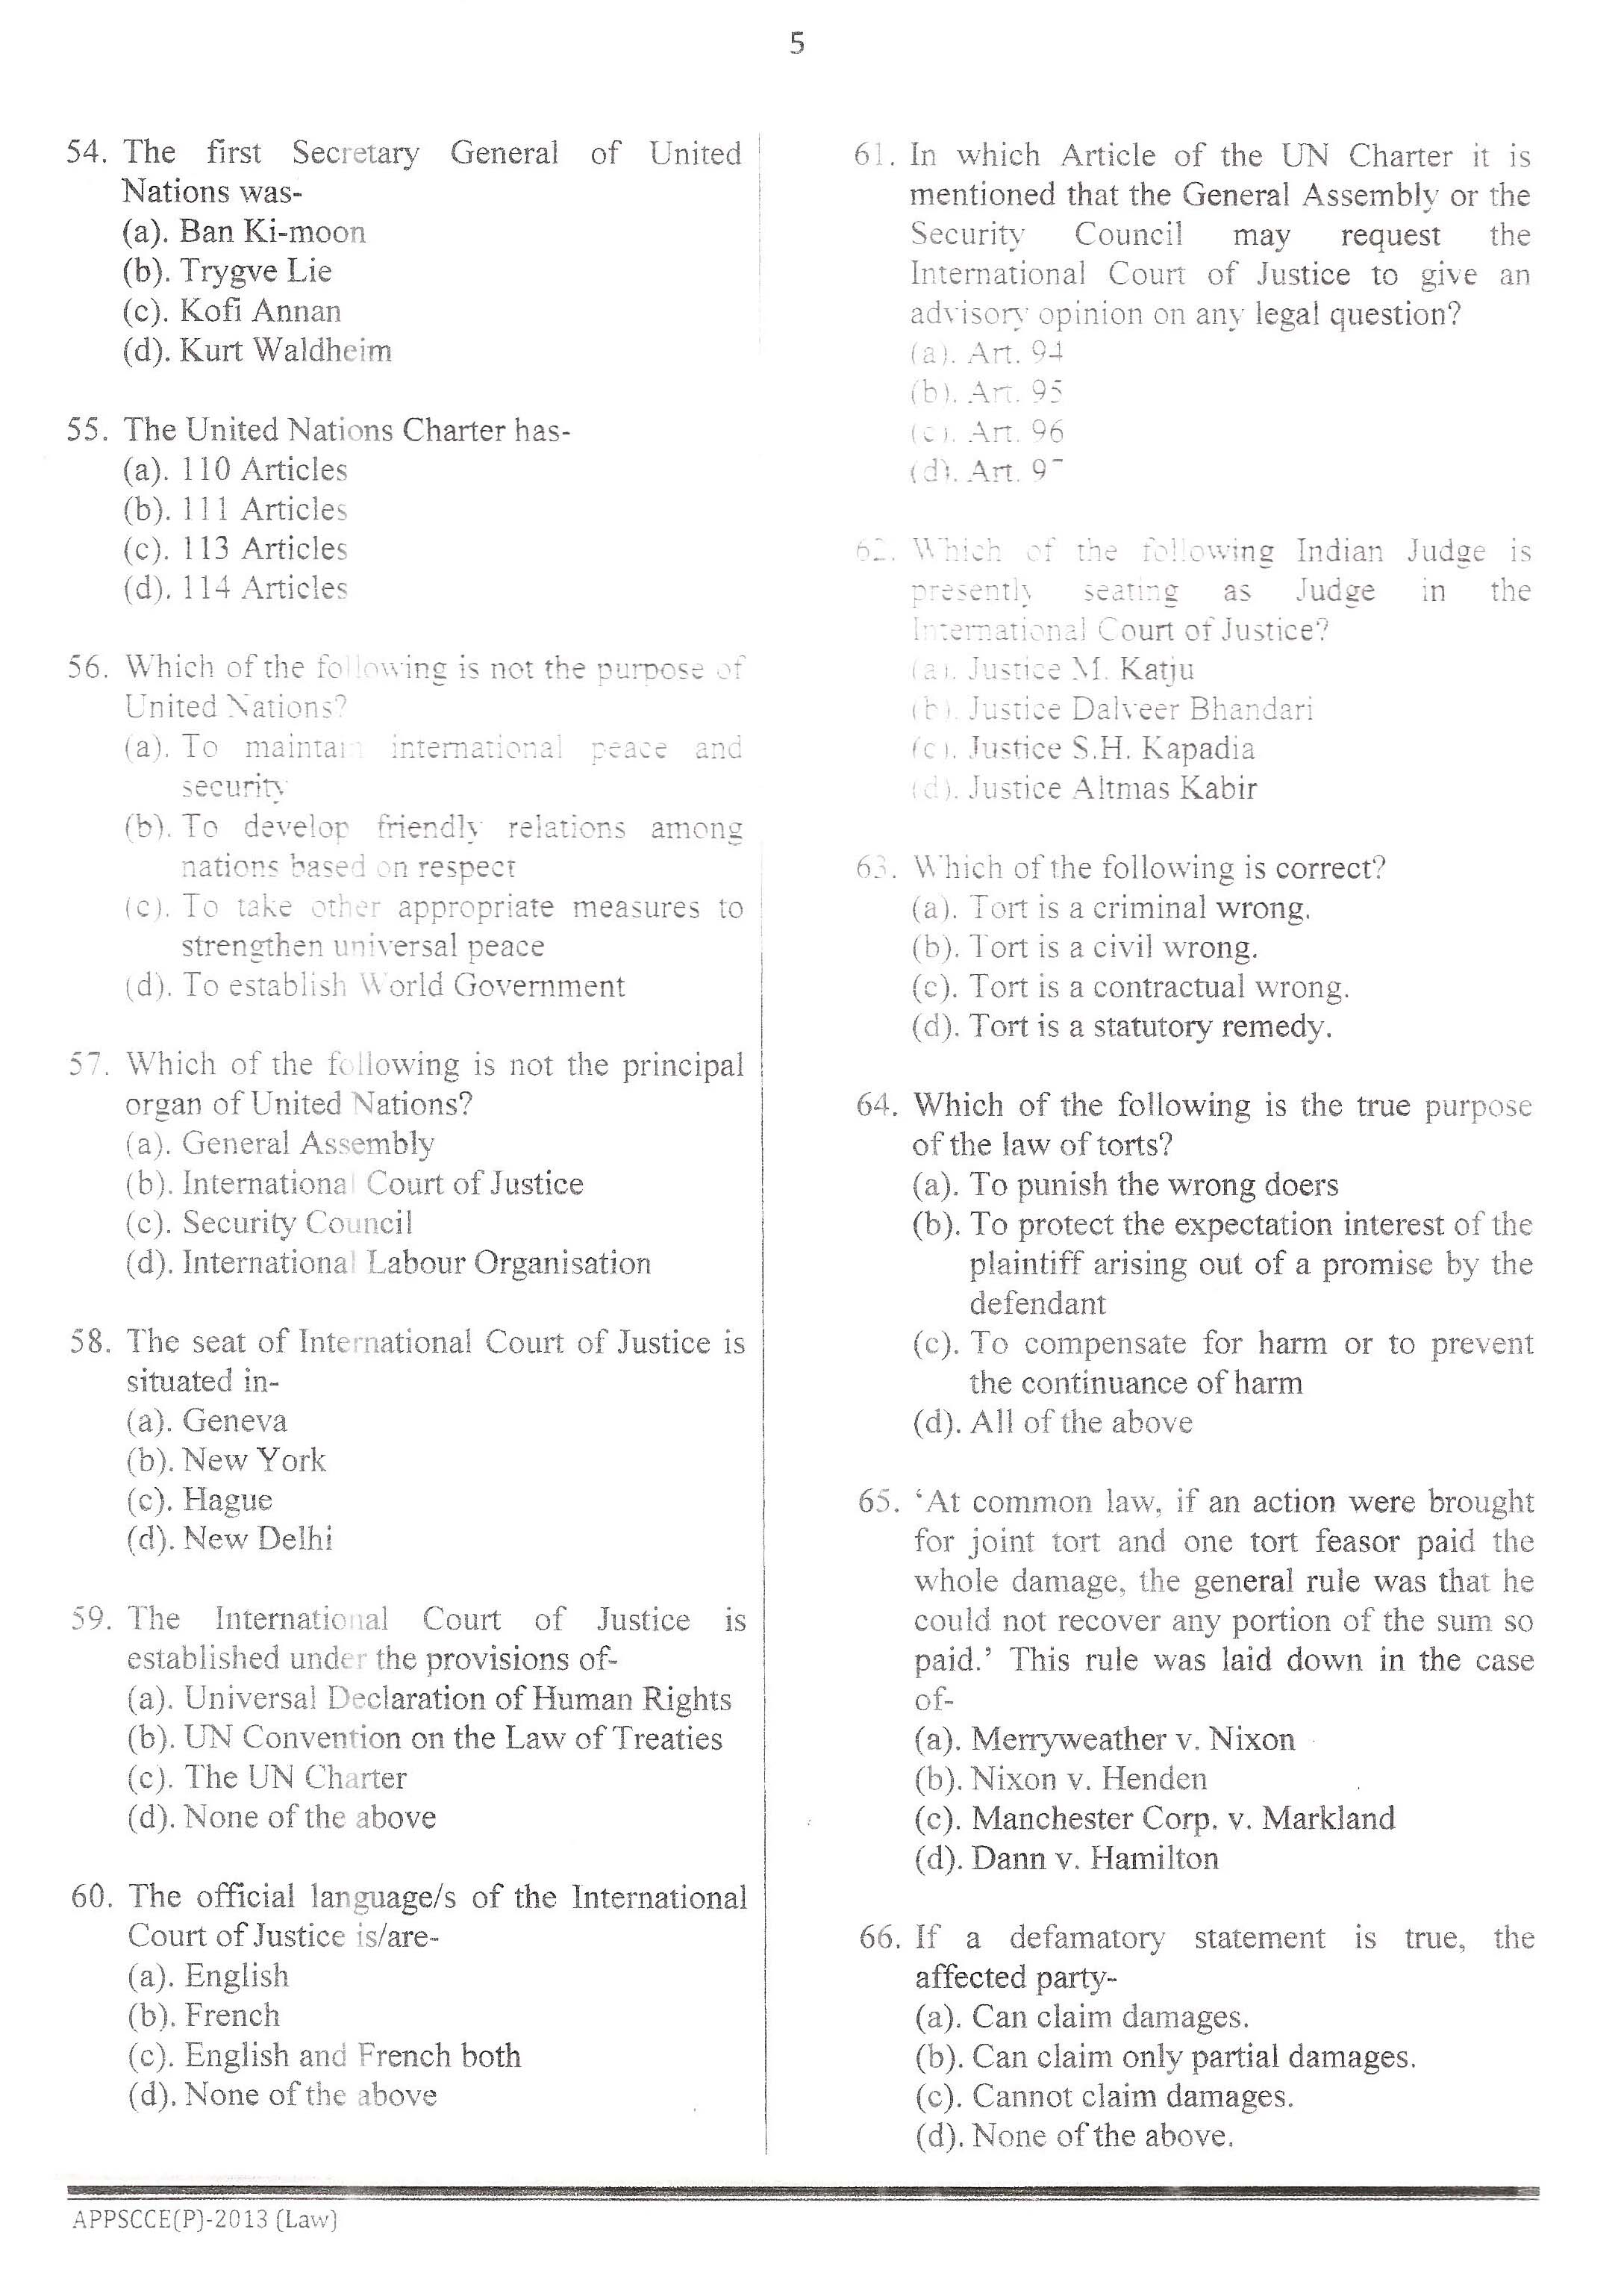 APPSC Combined Competitive Prelims Exam 2013 Law 6